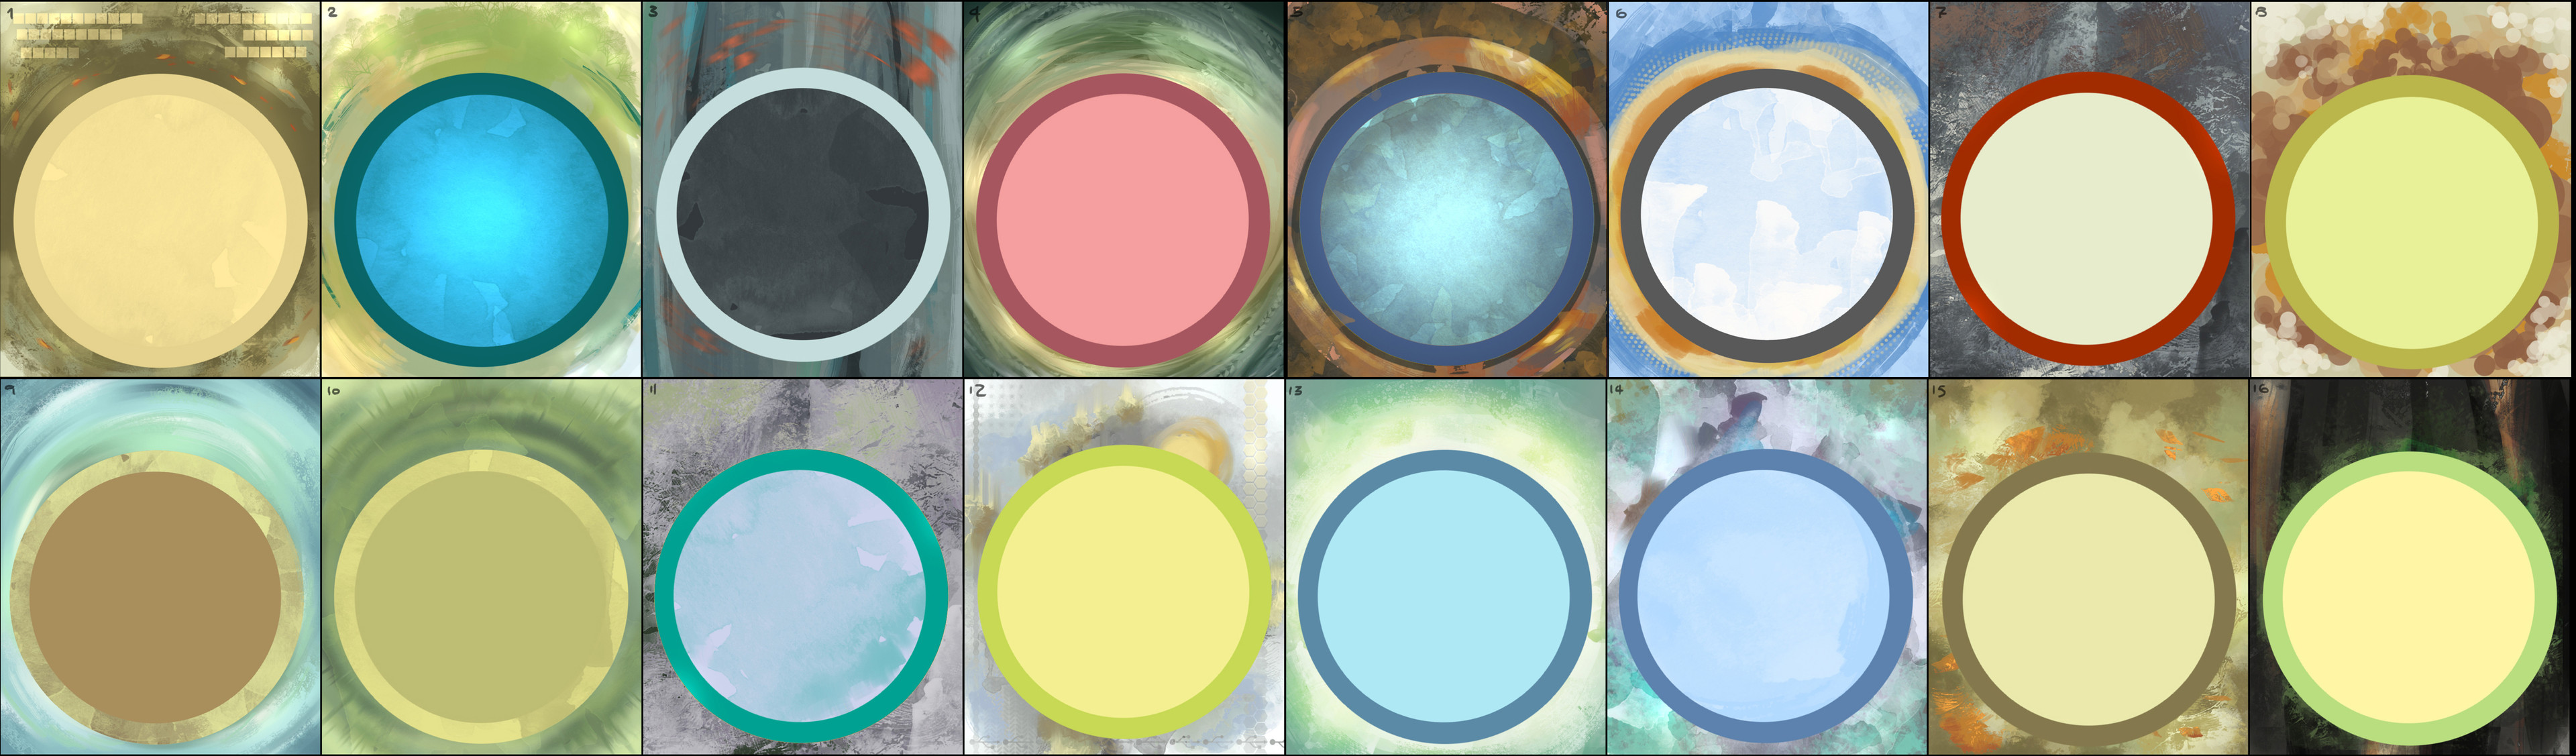 Early gaming board color concepts